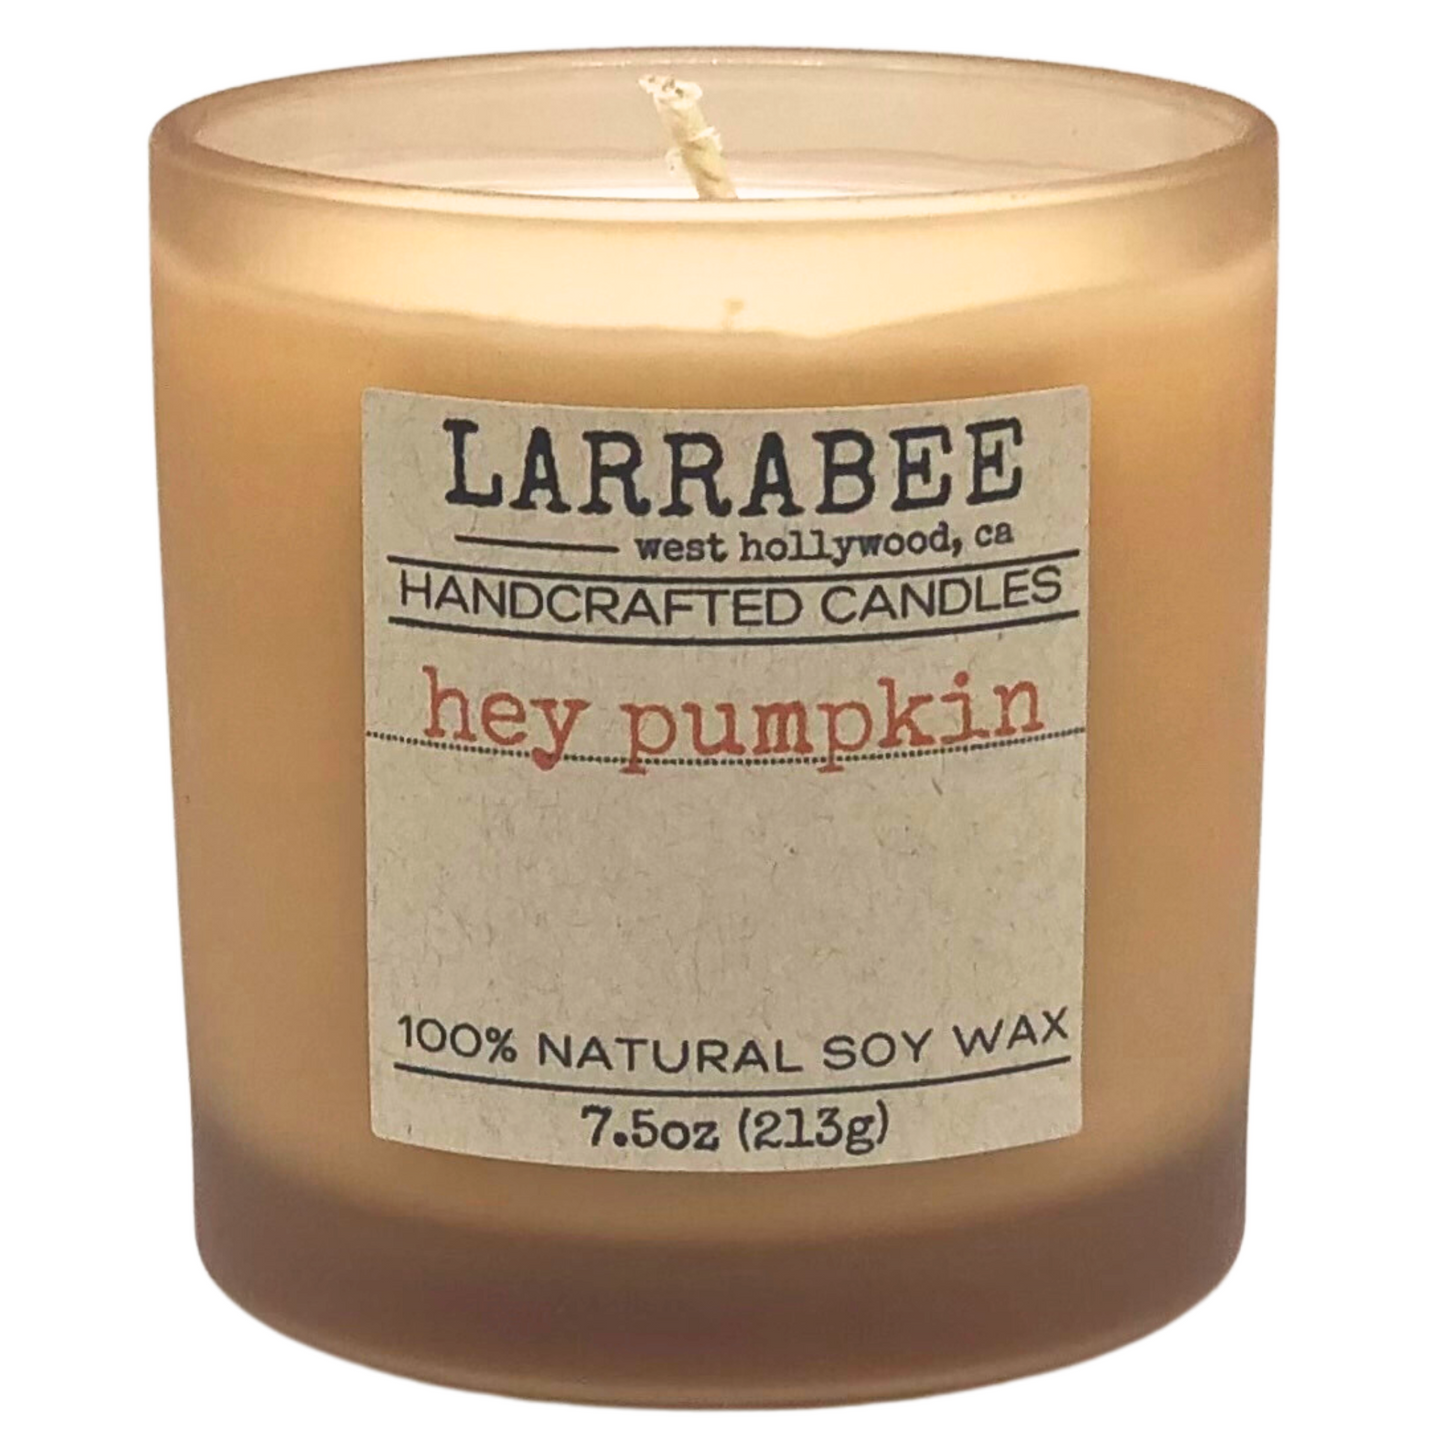 Hey Pumpkin! handcrafted candle